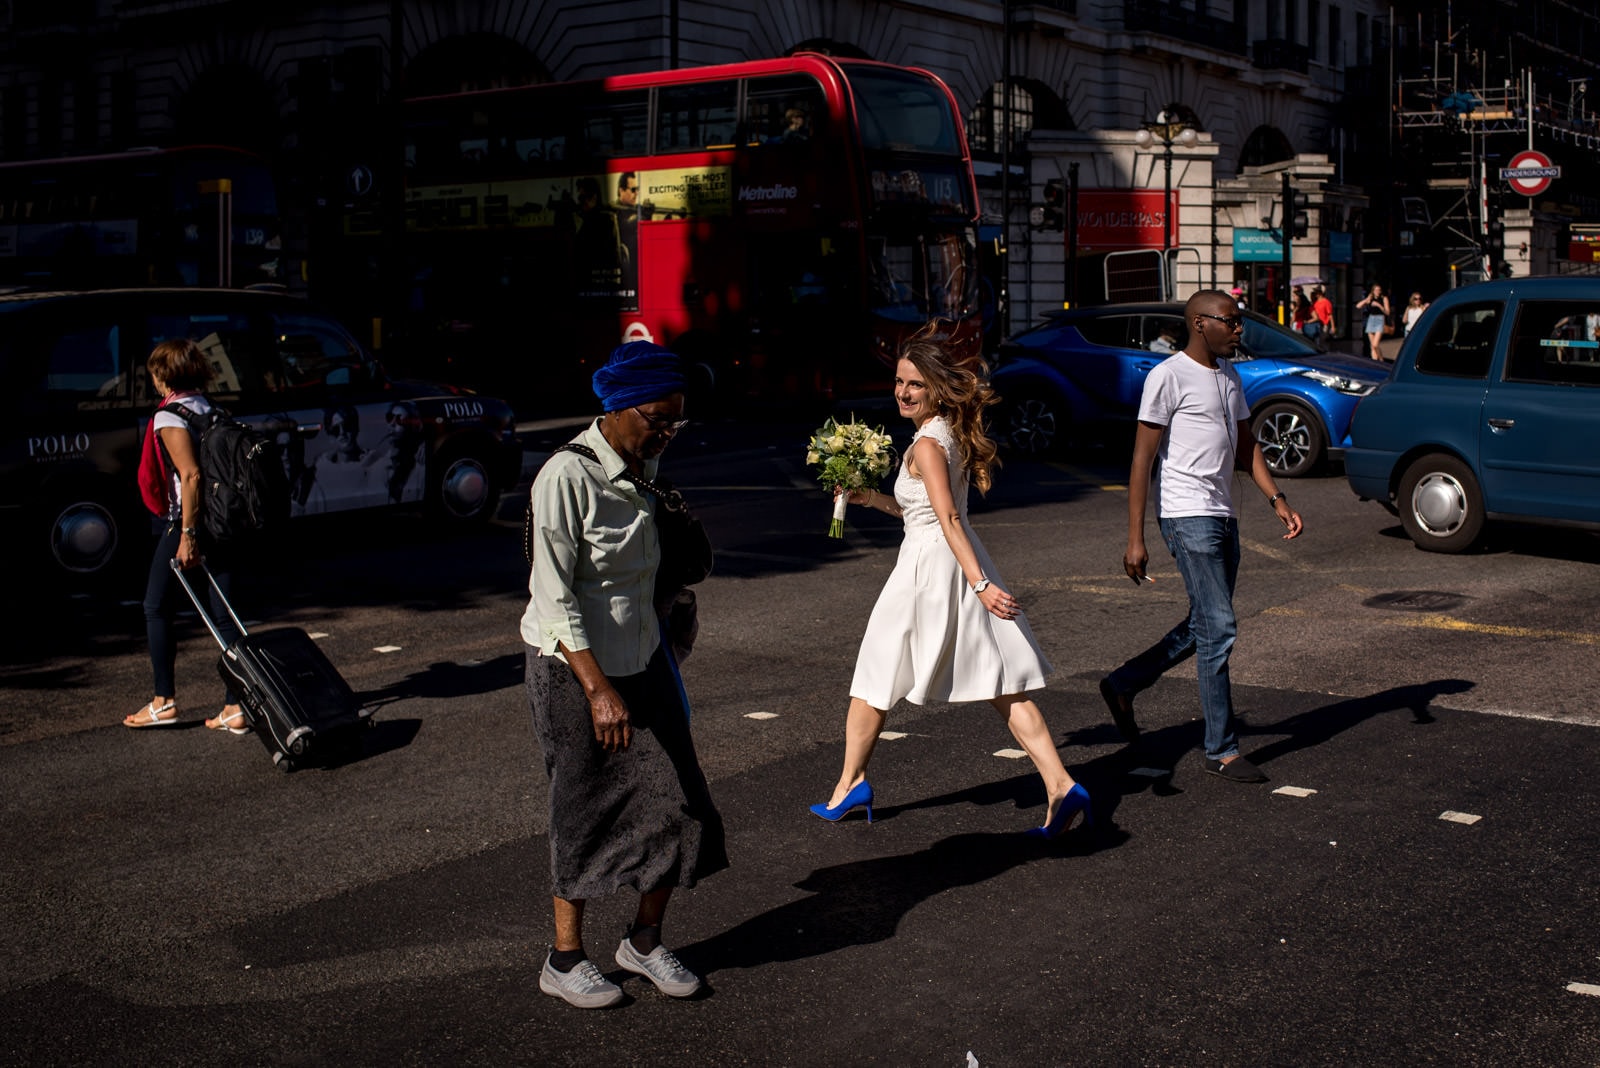 photo of bride in wedding dress walking across the street in London with a red bus in background.